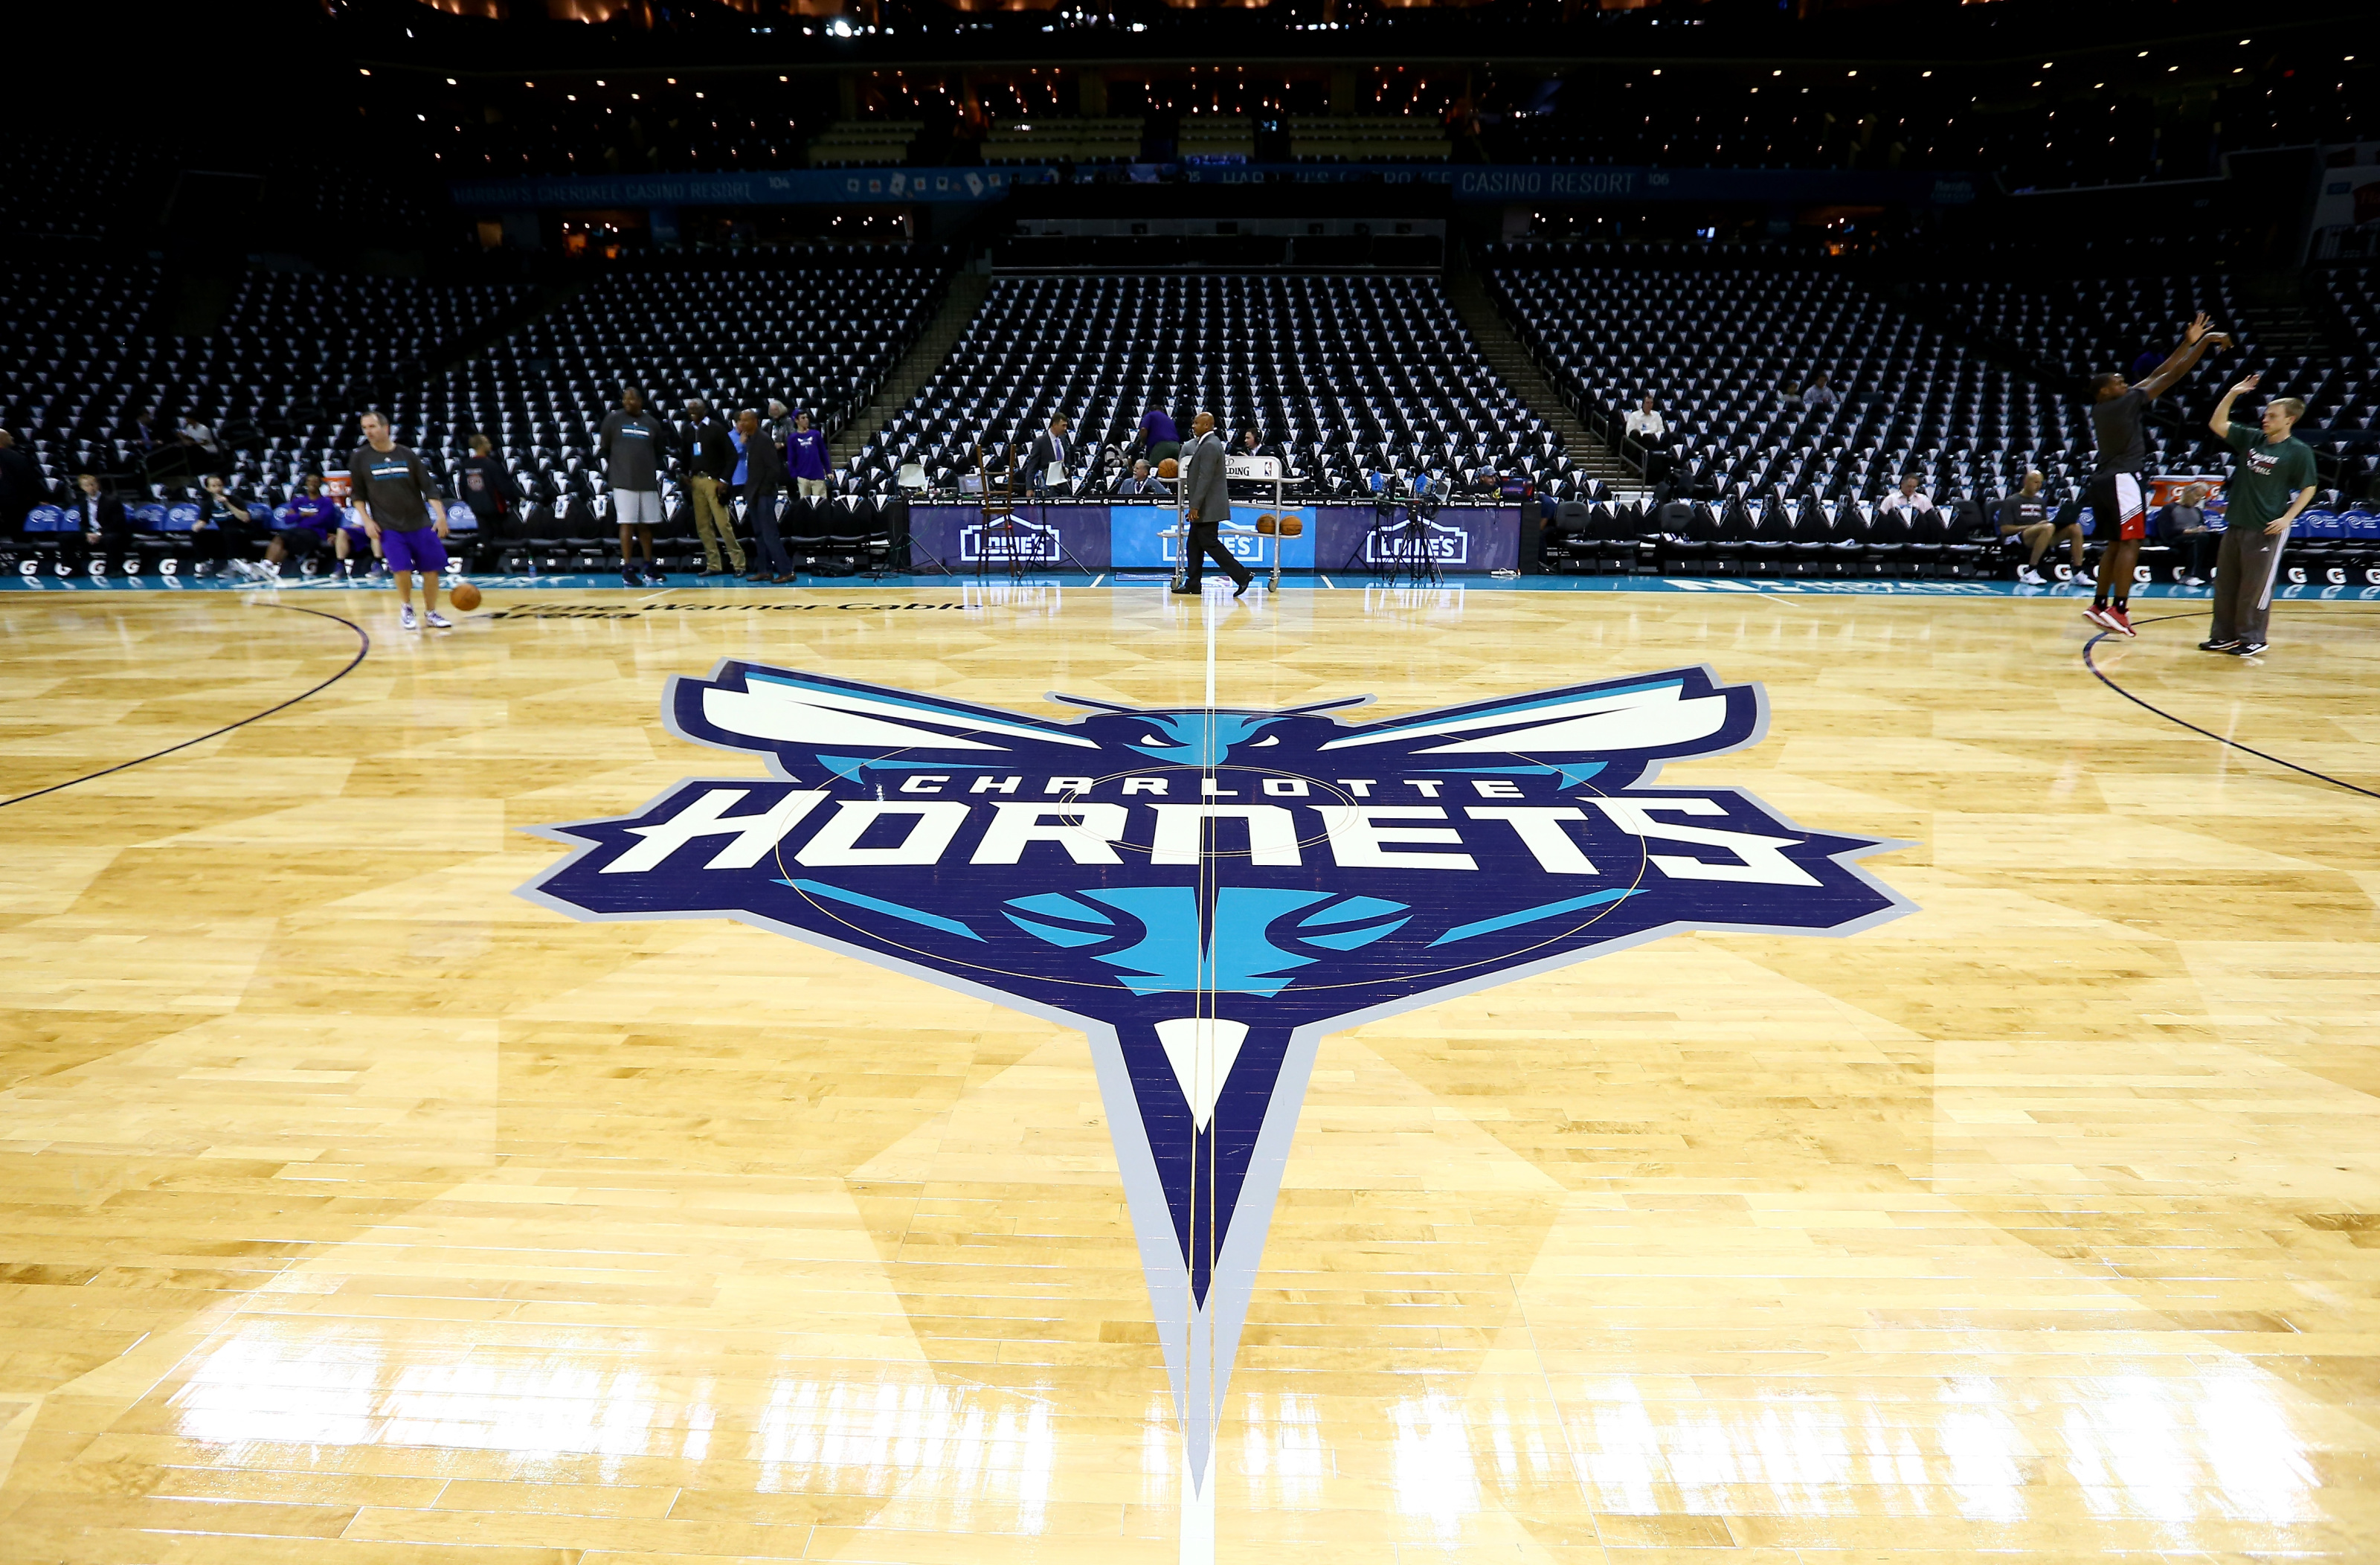 The Charlotte Hornets Look Circa 2013